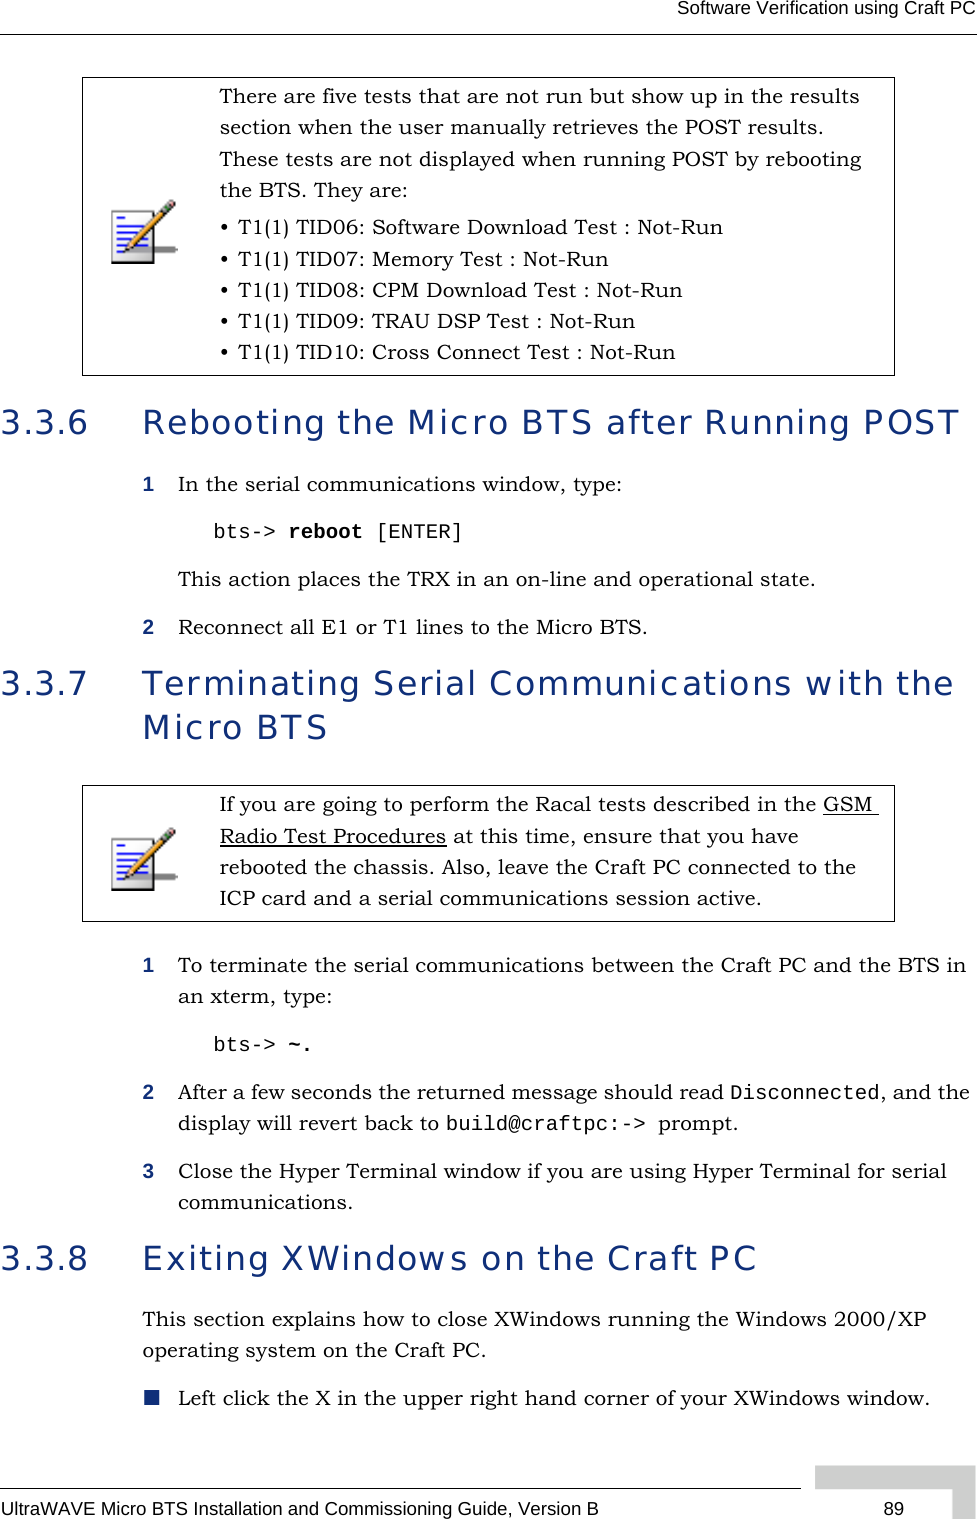 UltraWAVE Micro BTS Installation and Commissioning Guide, Version B 89Software Verification using Craft PC3.3.6 Rebooting the Micro BTS after Running POST1In the serial communications window, type:bts-&gt; reboot [ENTER]This action places the TRX in an on-line and operational state.2Reconnect all E1 or T1 lines to the Micro BTS.3.3.7 Terminating Serial Communications with the Micro BTS1To terminate the serial communications between the Craft PC and the BTS in an xterm, type:bts-&gt; ~.2After a few seconds the returned message should read Disconnected, and the display will revert back to build@craftpc:-&gt; prompt.3Close the Hyper Terminal window if you are using Hyper Terminal for serial communications.3.3.8 Exiting XWindows on the Craft PCThis section explains how to close XWindows running the Windows 2000/XP operating system on the Craft PC.Left click the X in the upper right hand corner of your XWindows window.There are five tests that are not run but show up in the results section when the user manually retrieves the POST results. These tests are not displayed when running POST by rebooting the BTS. They are:• T1(1) TID06: Software Download Test : Not-Run • T1(1) TID07: Memory Test : Not-Run • T1(1) TID08: CPM Download Test : Not-Run • T1(1) TID09: TRAU DSP Test : Not-Run • T1(1) TID10: Cross Connect Test : Not-Run If you are going to perform the Racal tests described in the GSM Radio Test Procedures at this time, ensure that you have rebooted the chassis. Also, leave the Craft PC connected to the ICP card and a serial communications session active.